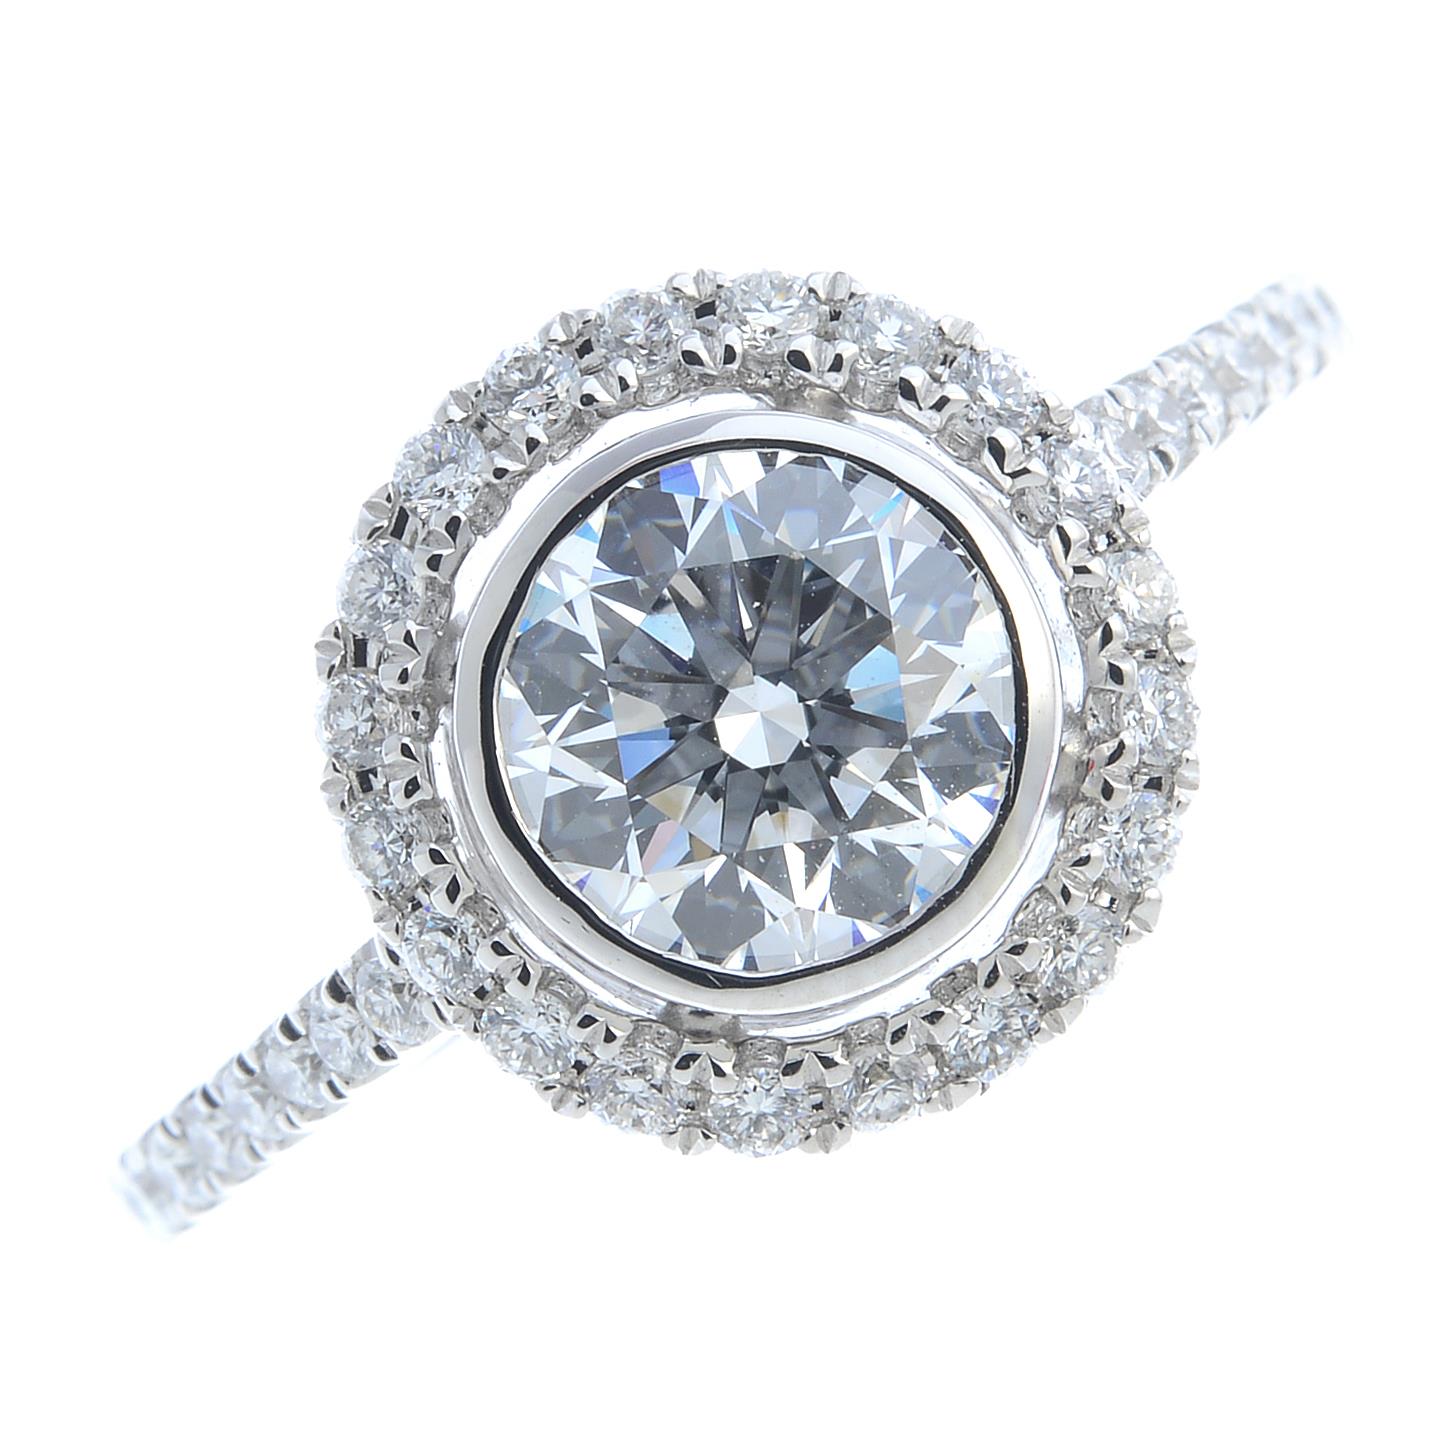 A diamond single-stone ring. The brilliant-cut diamond collet, weighing 1.14cts, with similarly-